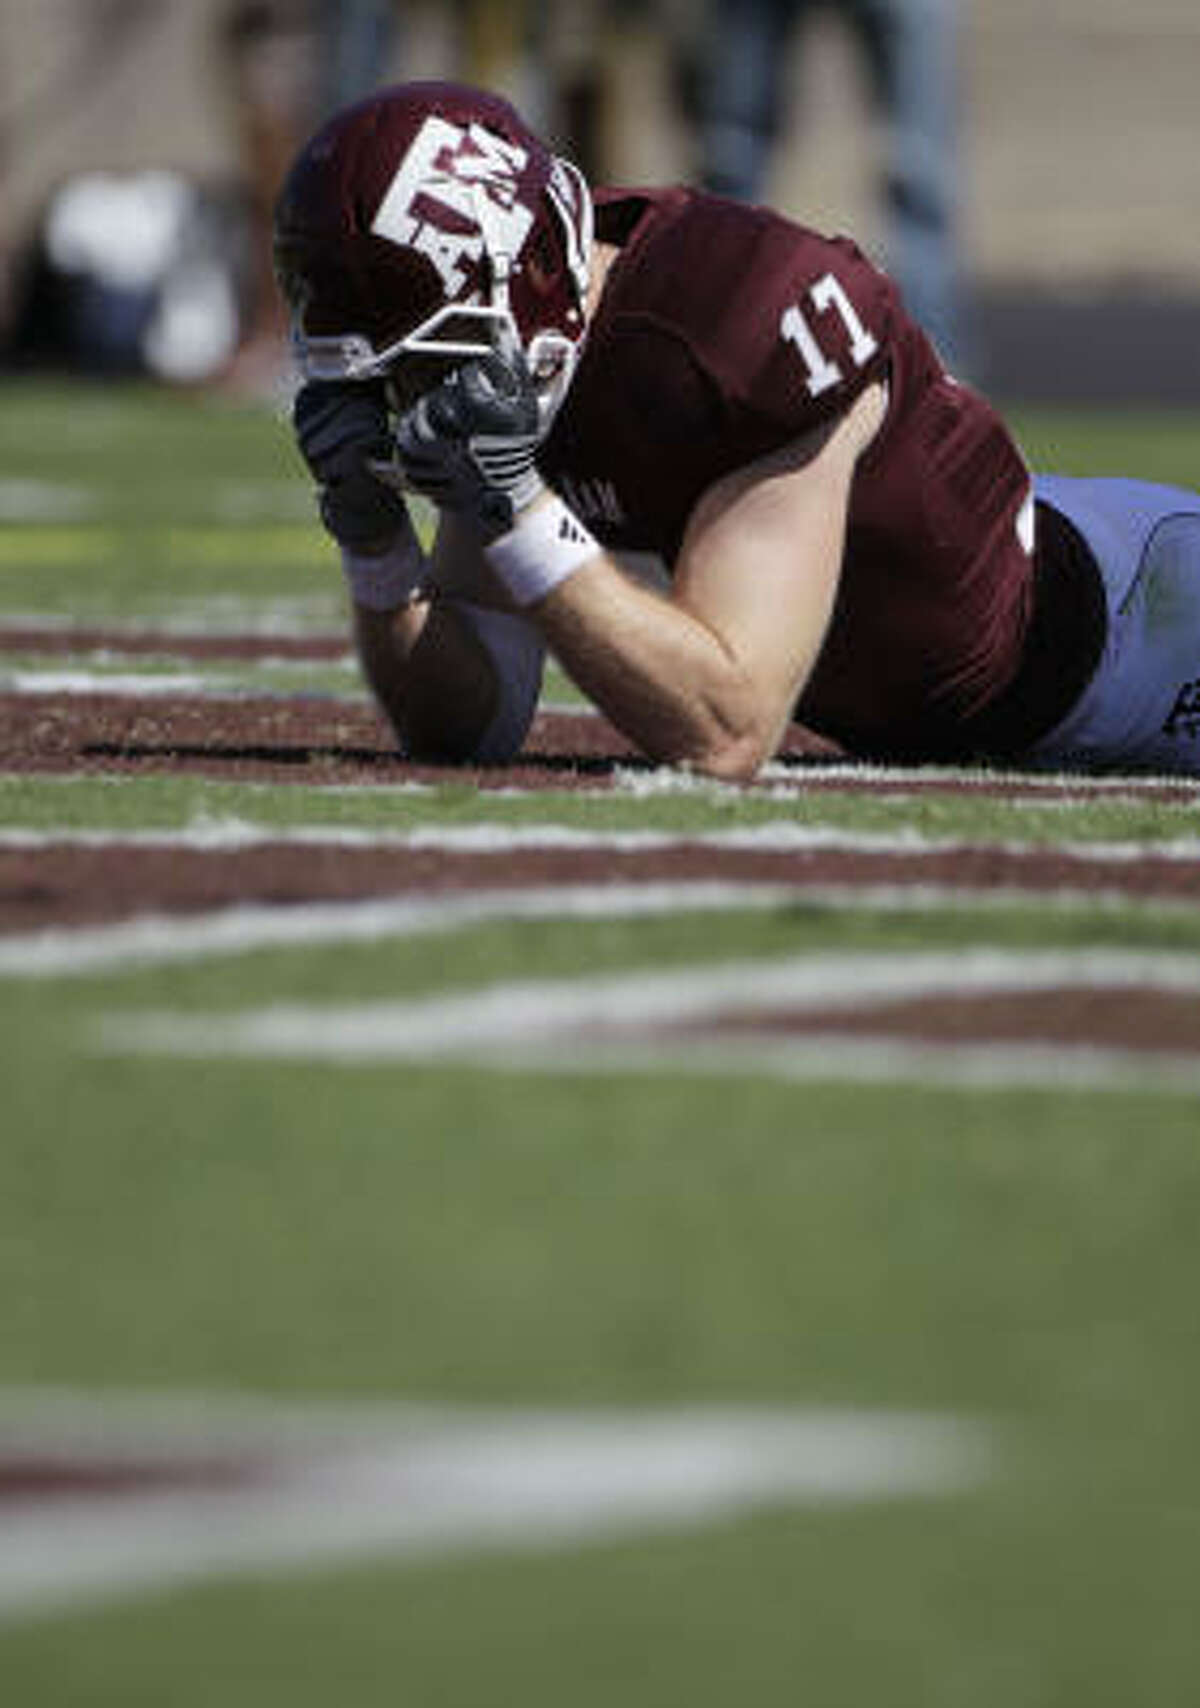 Texas A&M receiver Ryan Tannehill shows his dejection in the end zone after failing to make a catch on a deep pass from quarterback Jerrod Johnson.